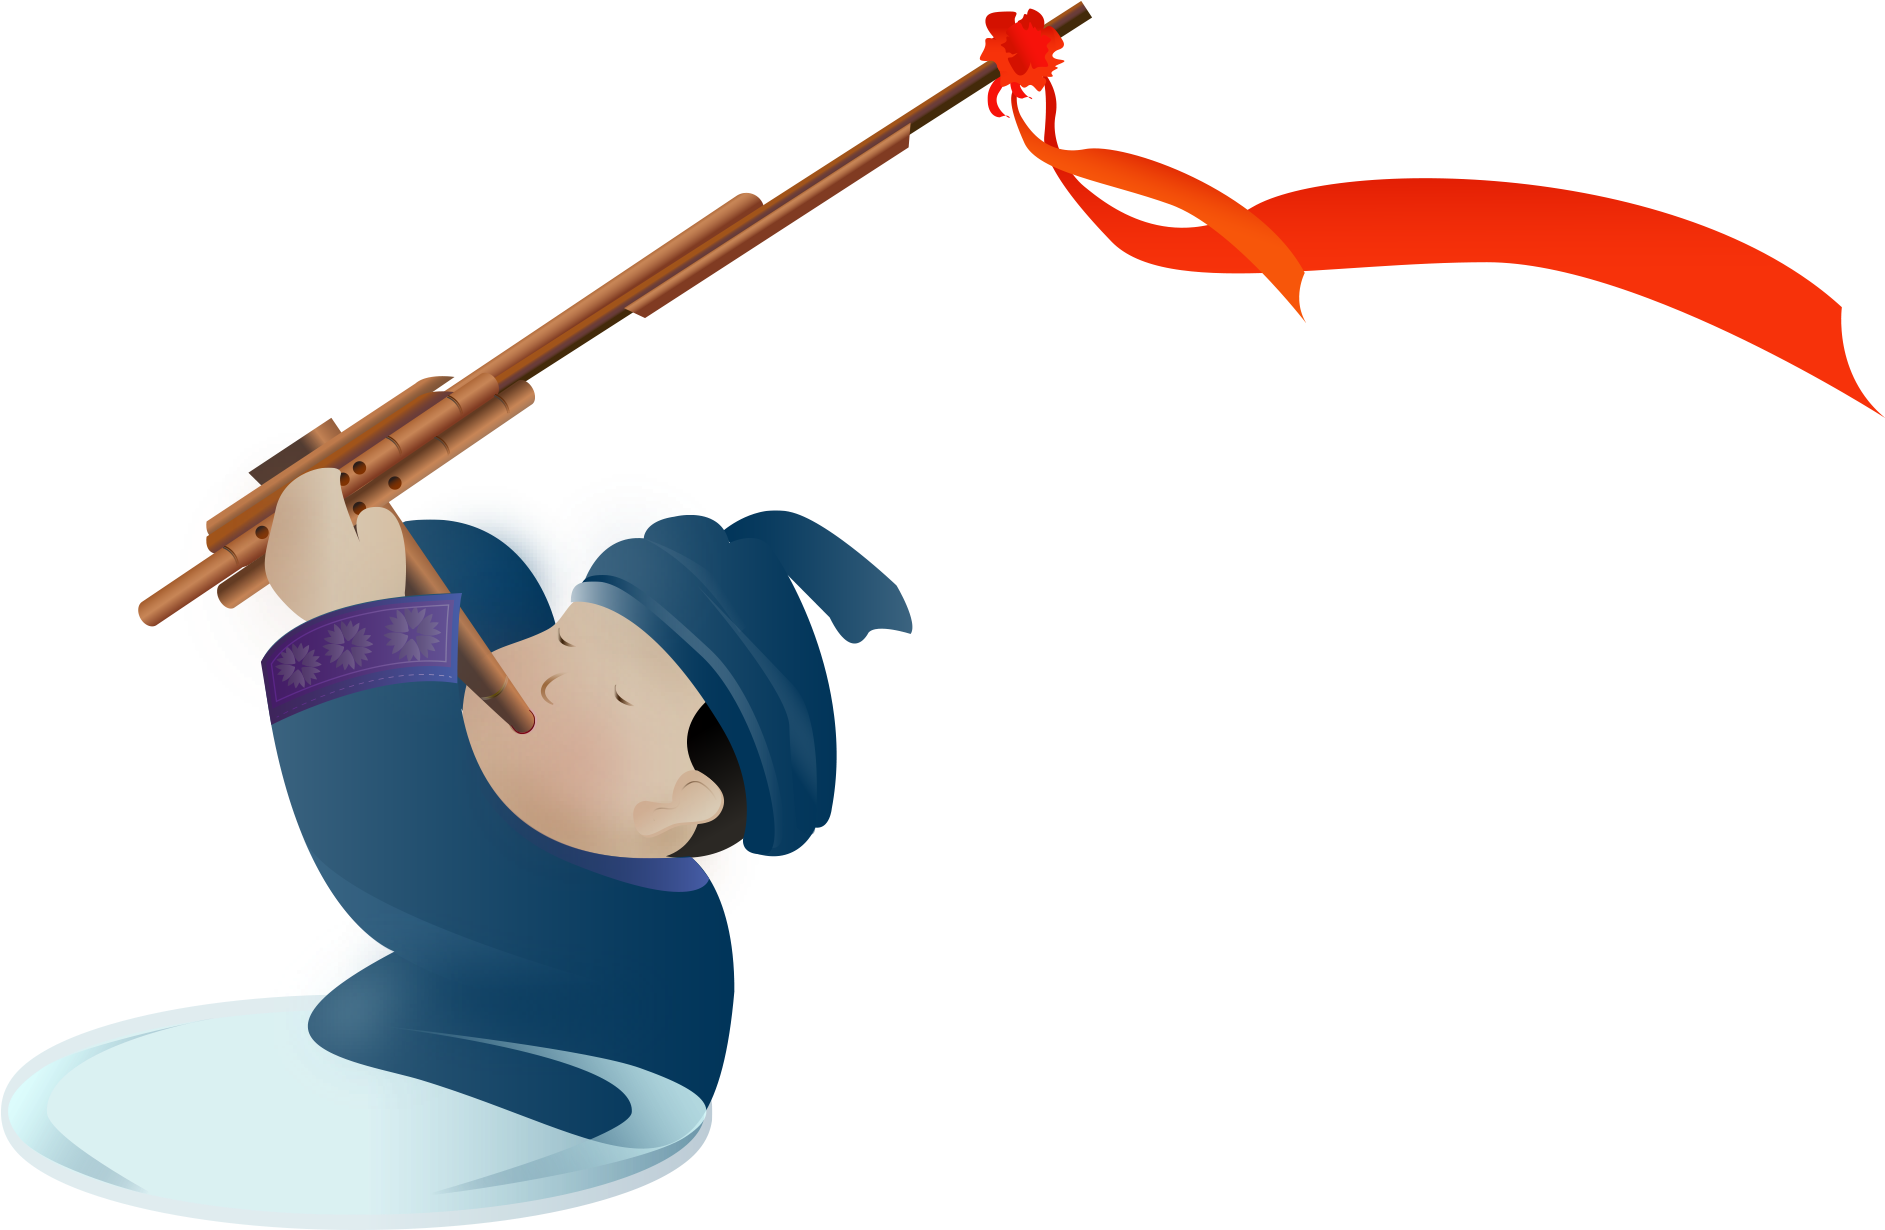 Animated Flute Player Illustration PNG